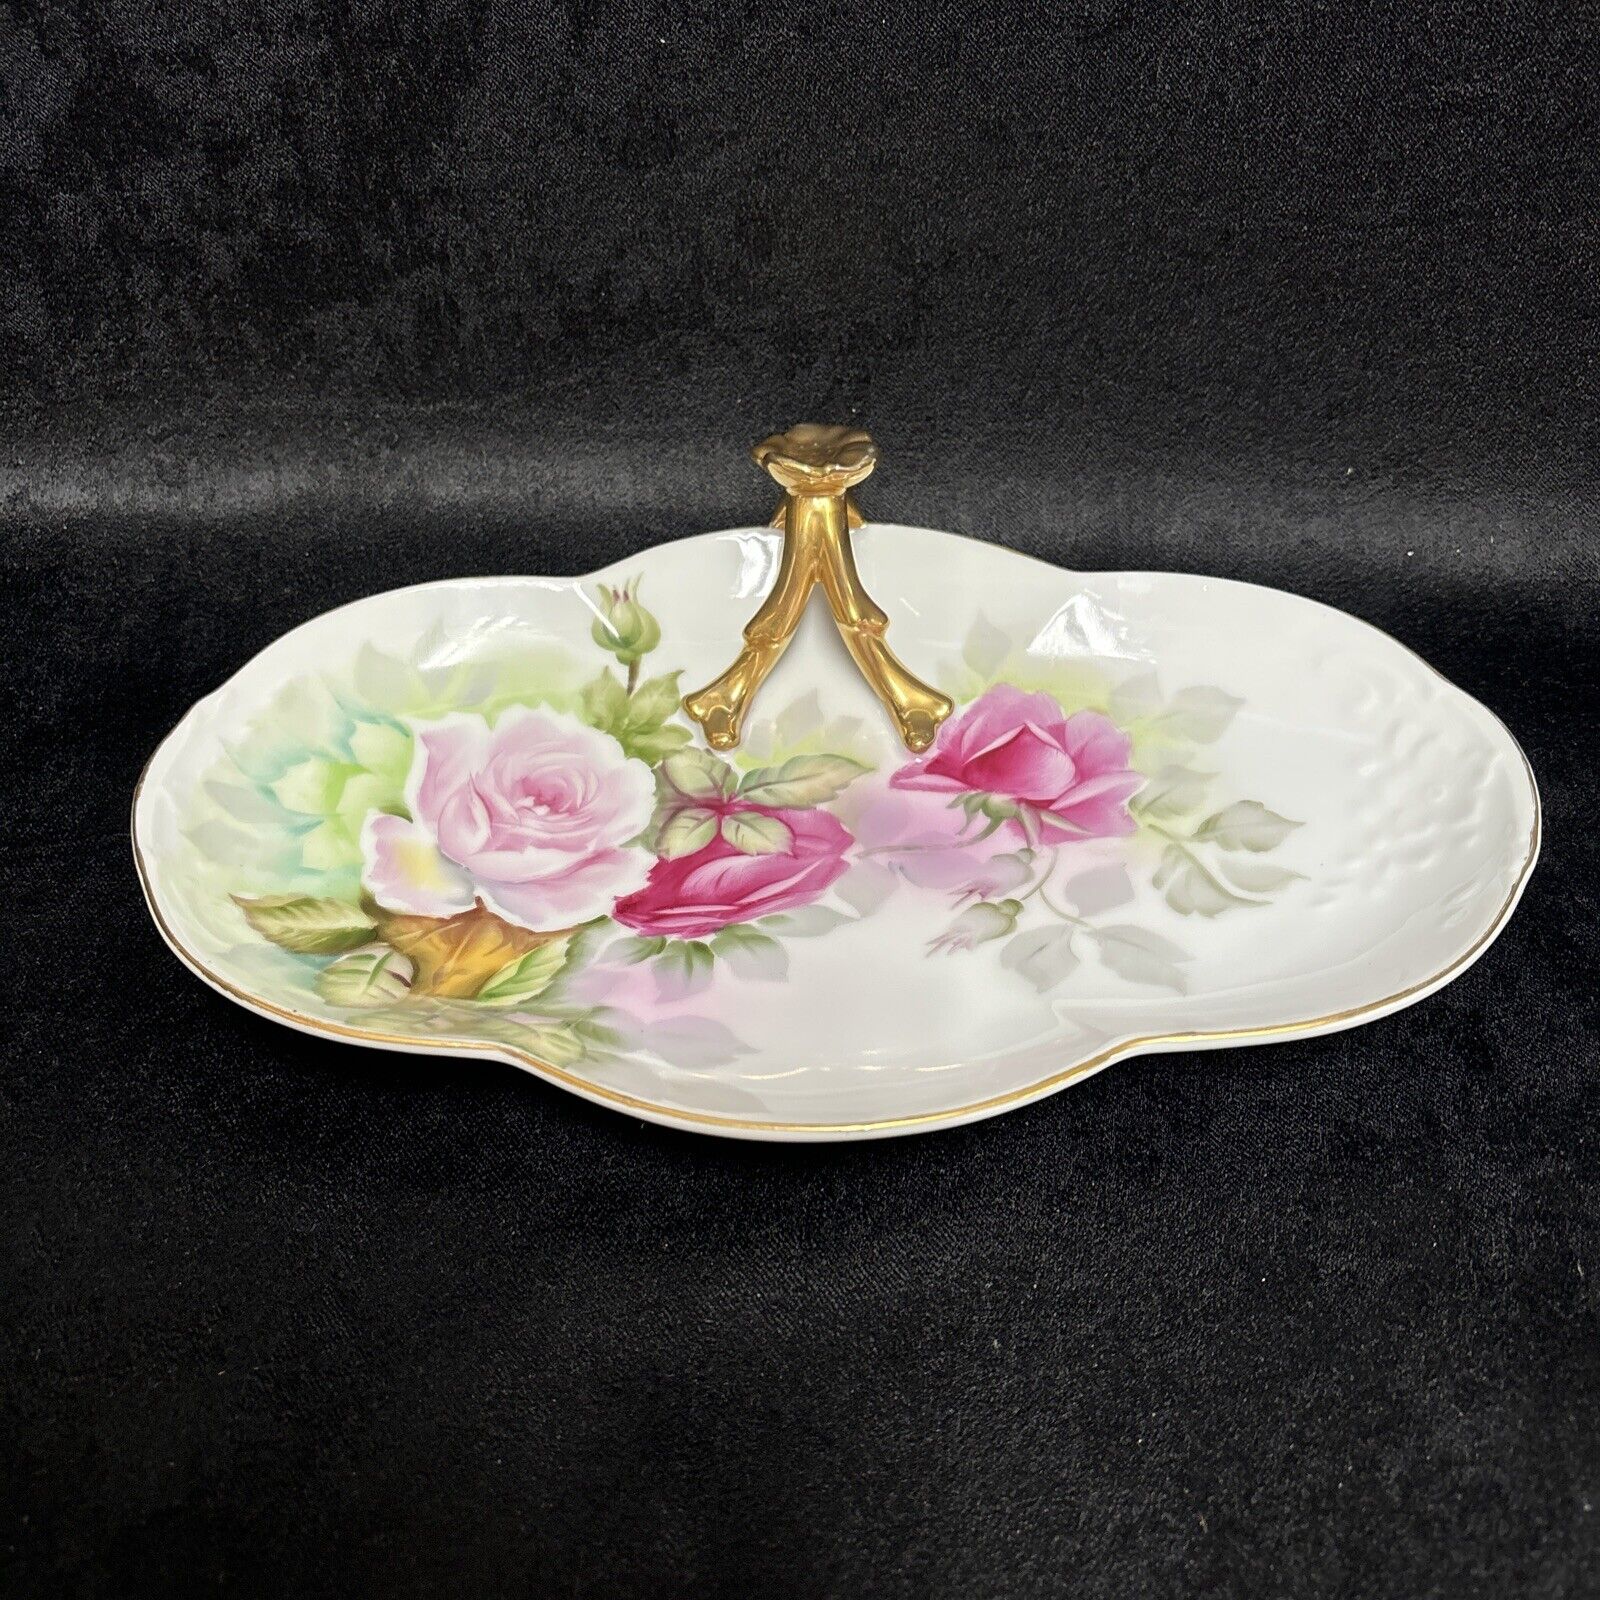 Vtg Hand Painted Porcelain Handled Nappy Trinket Dish Tray Pink Cabbage Roses